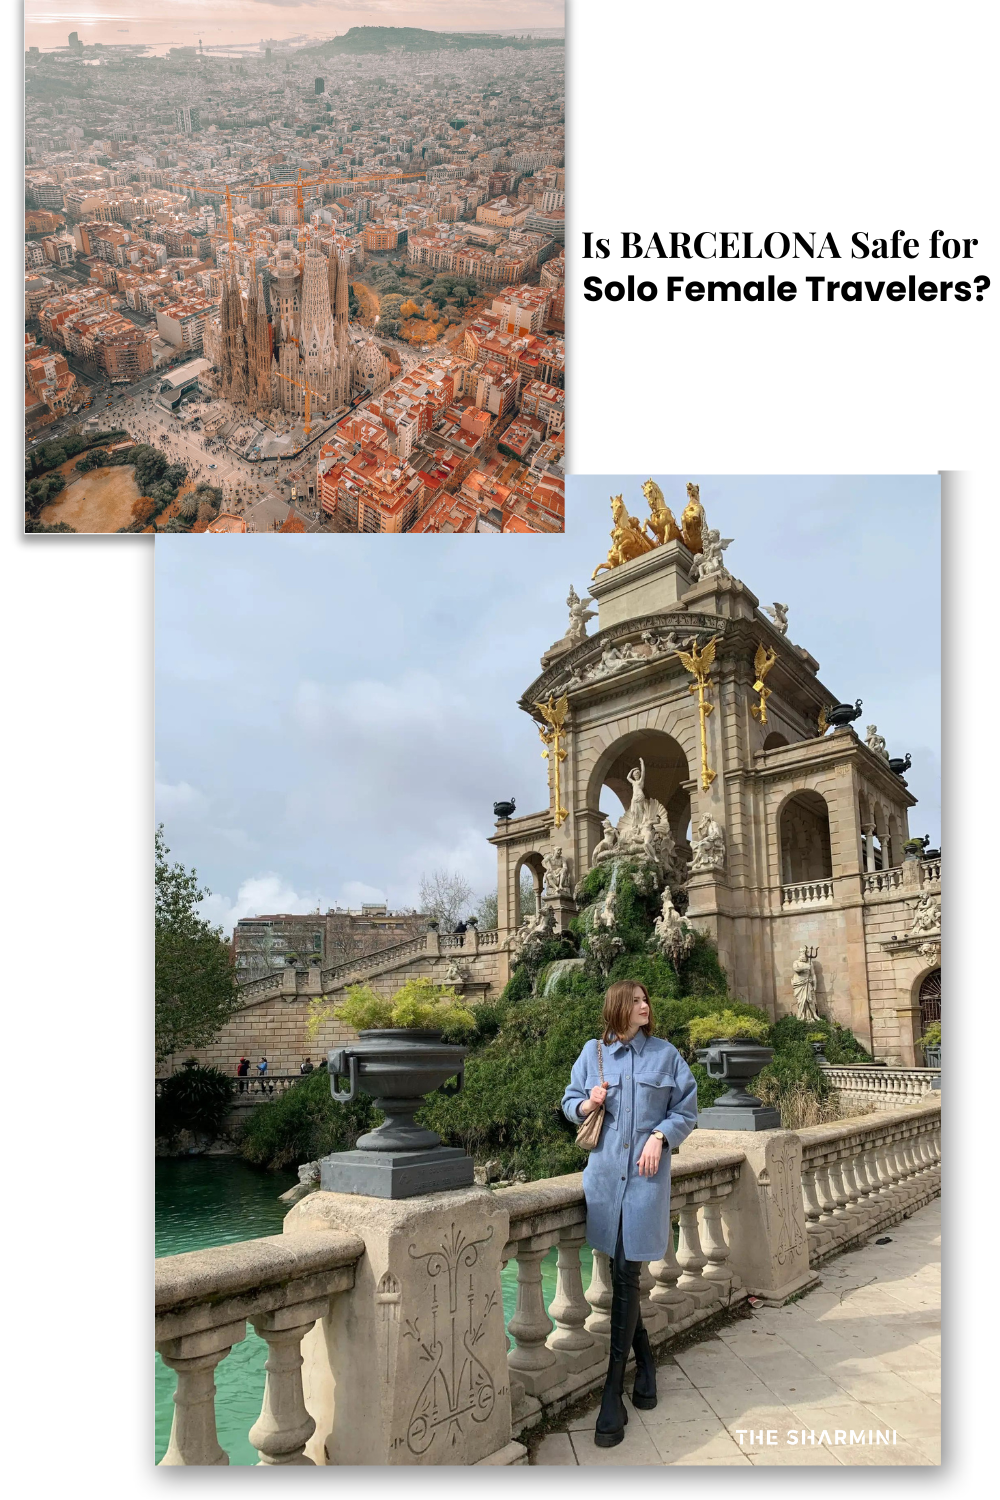 Is Barcelona safe for solo female travelers?